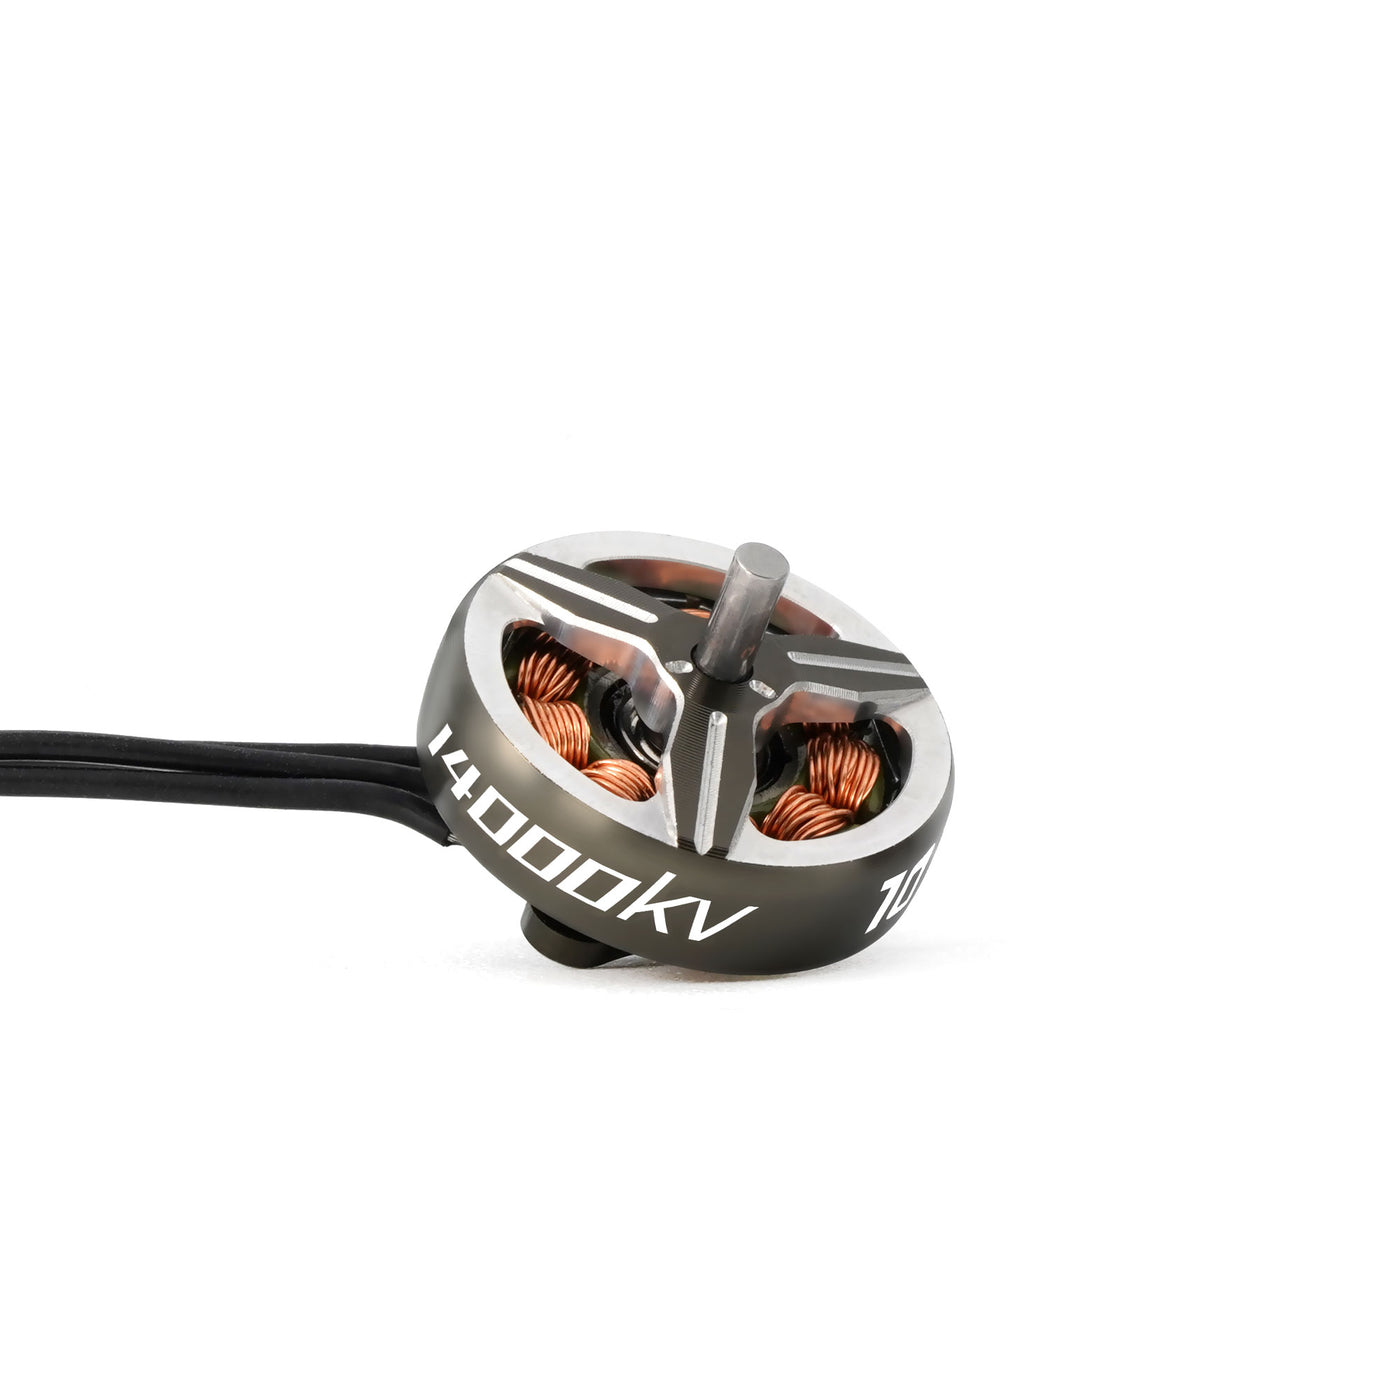 Sub250 M2 1002 Brushless Motor 1.5mm shaft Specially Designed for 1.6-2 inch FPV Drones